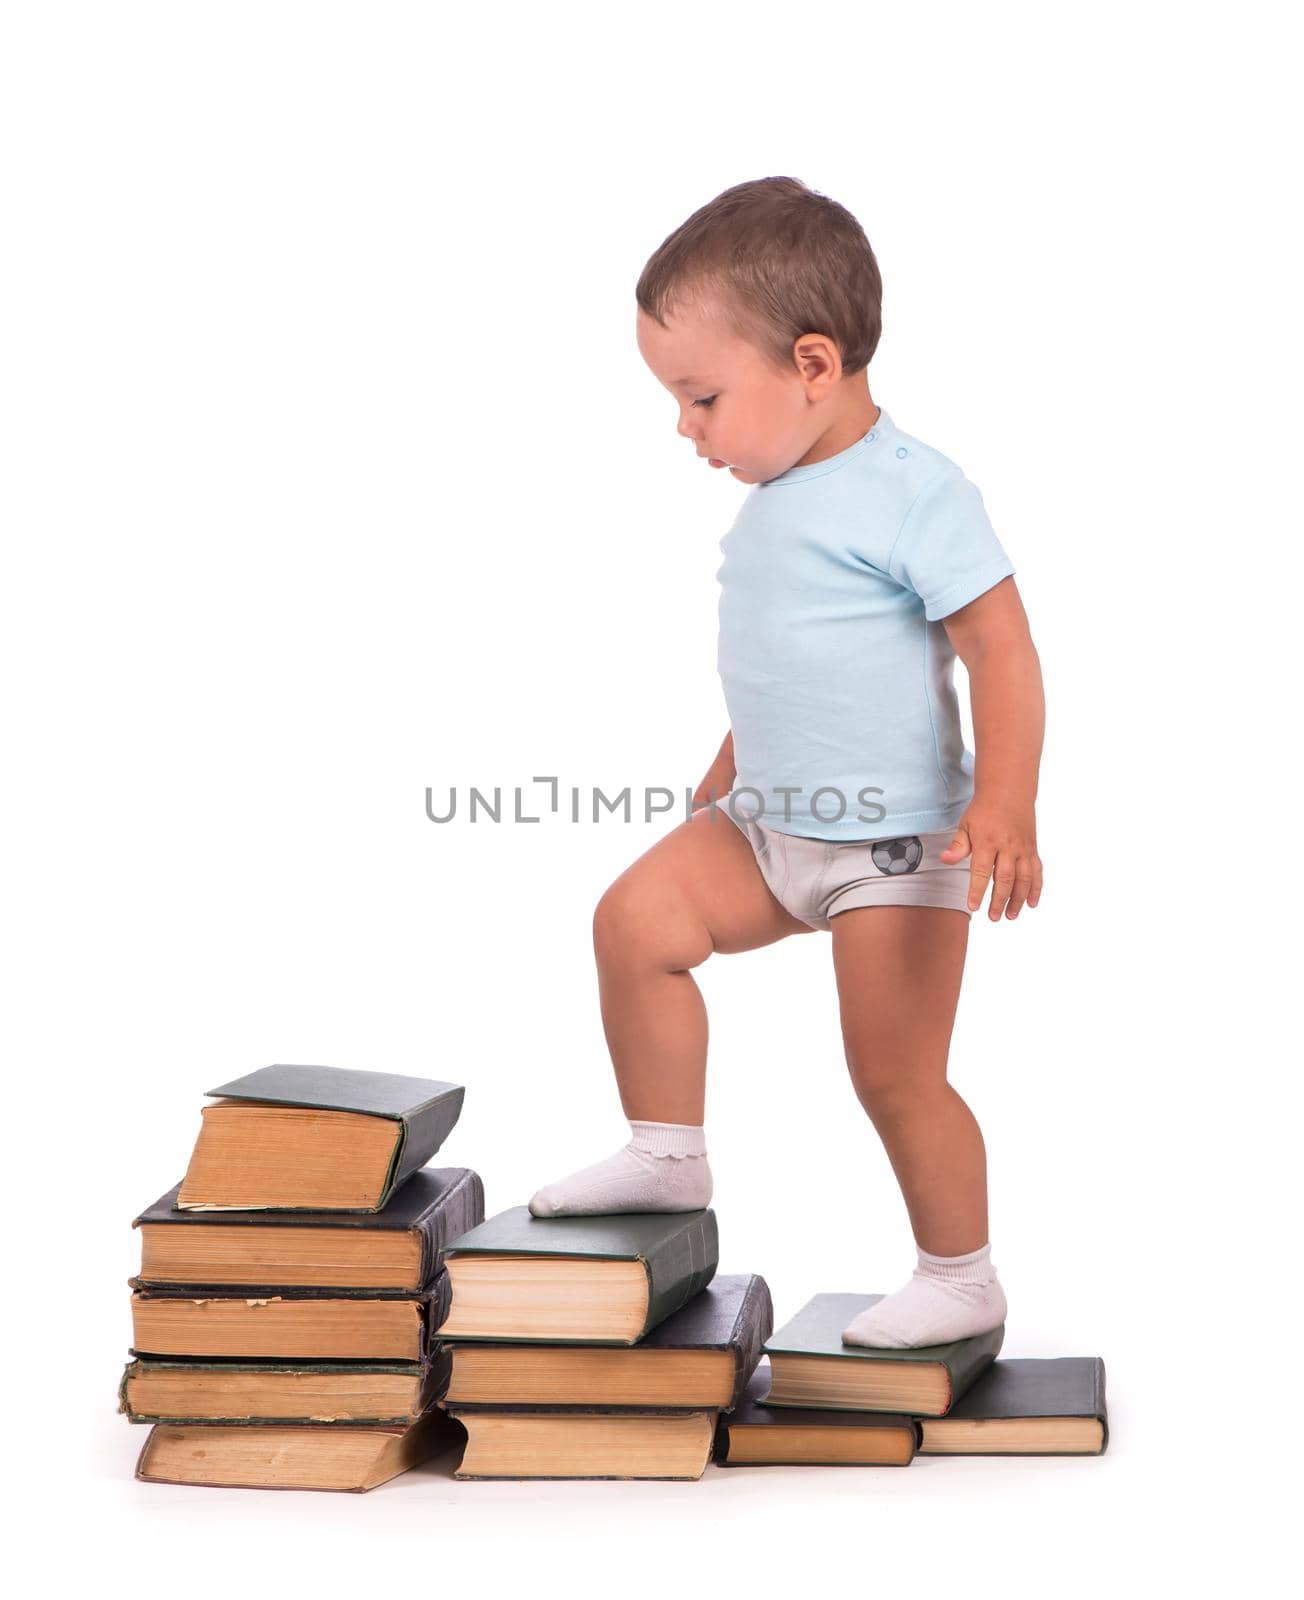 Boy with books for an education portrait - isolated over a white background